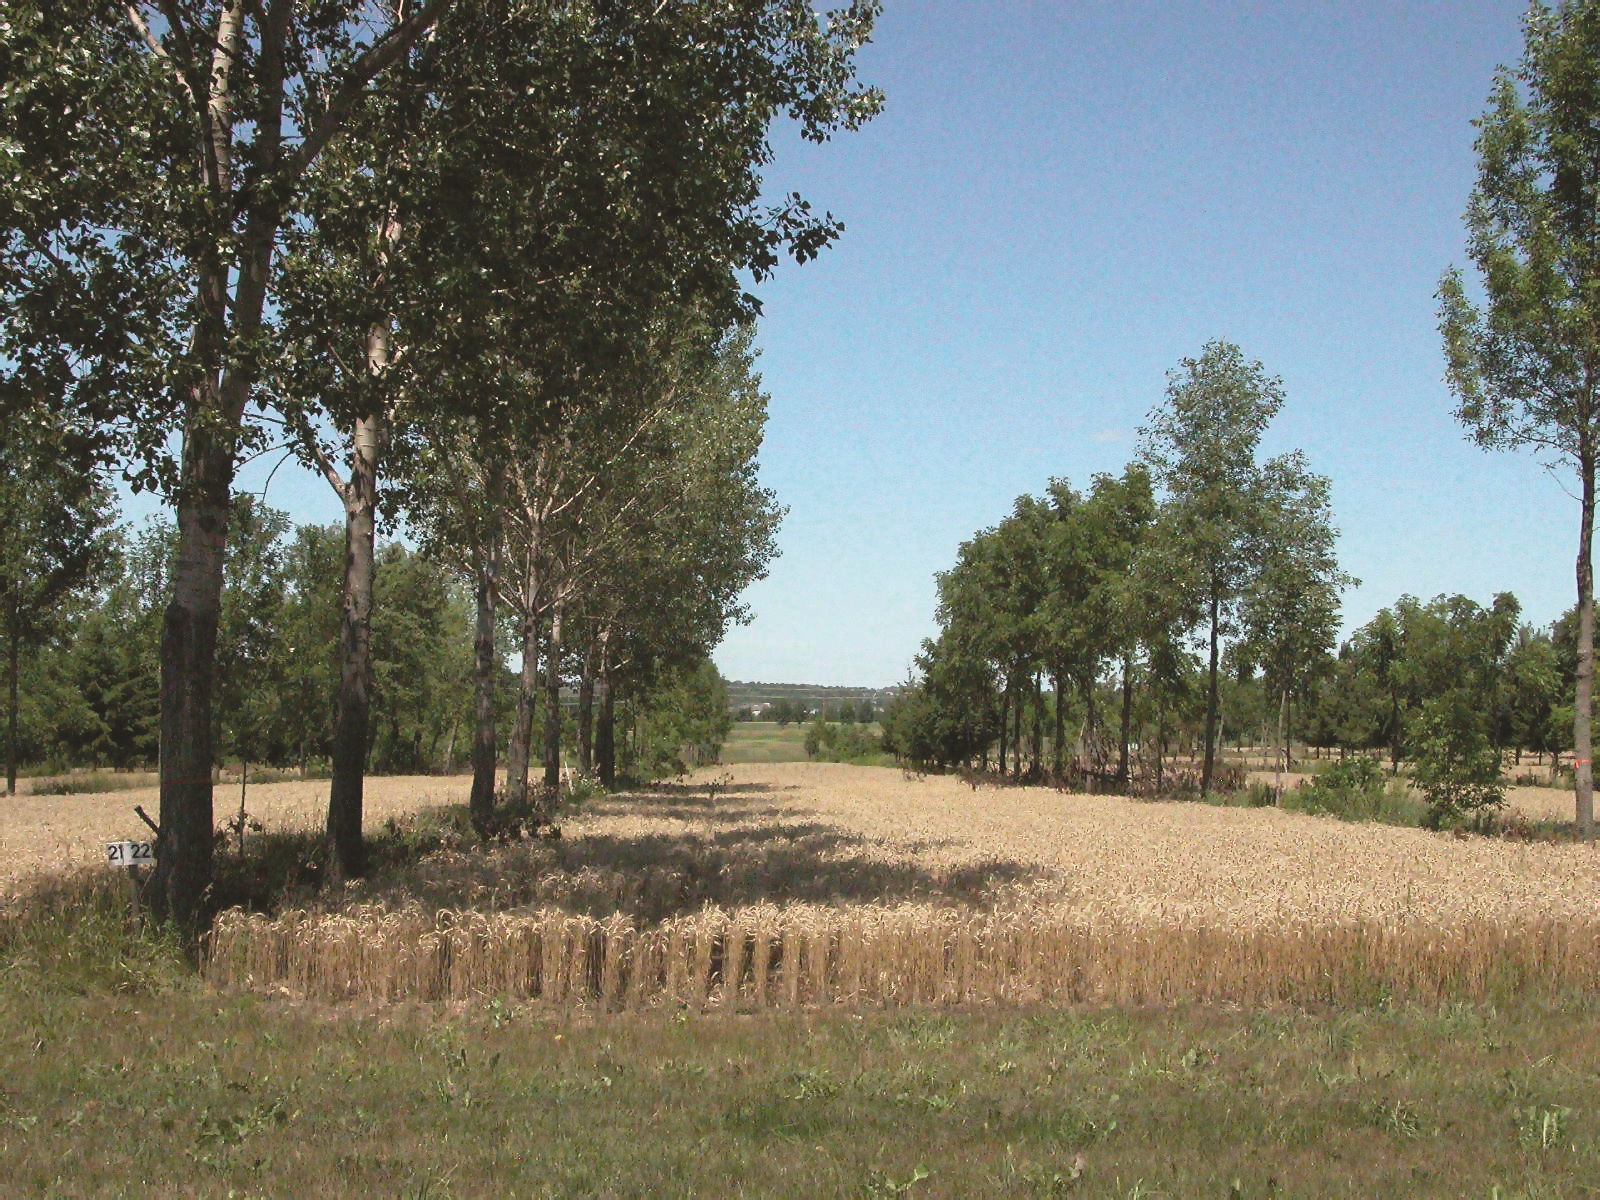 Rows of mature trees with cereal crop growing in between the rows.